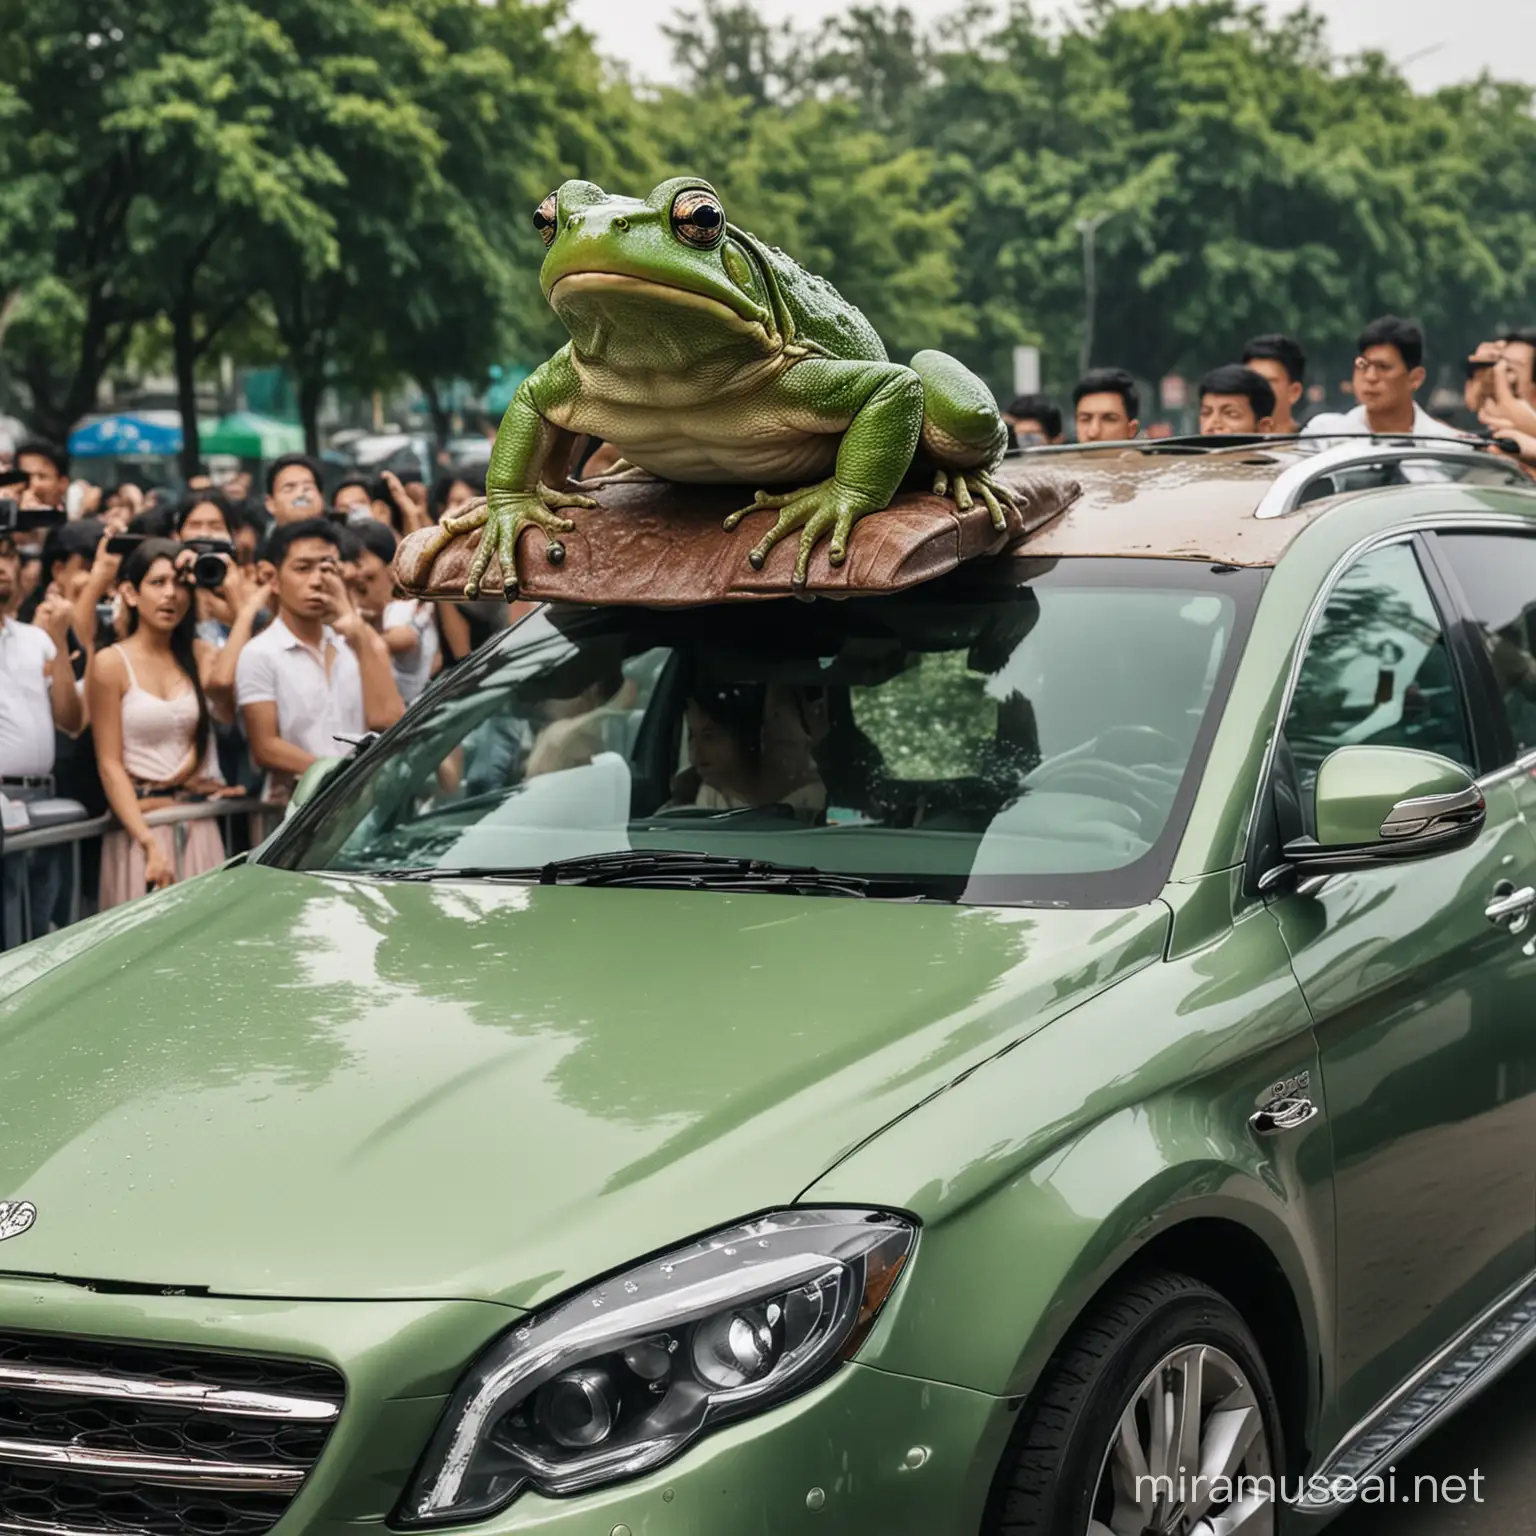 a huge frog sitting on the top of luxury car, and peoples looks terrified, by looking it.